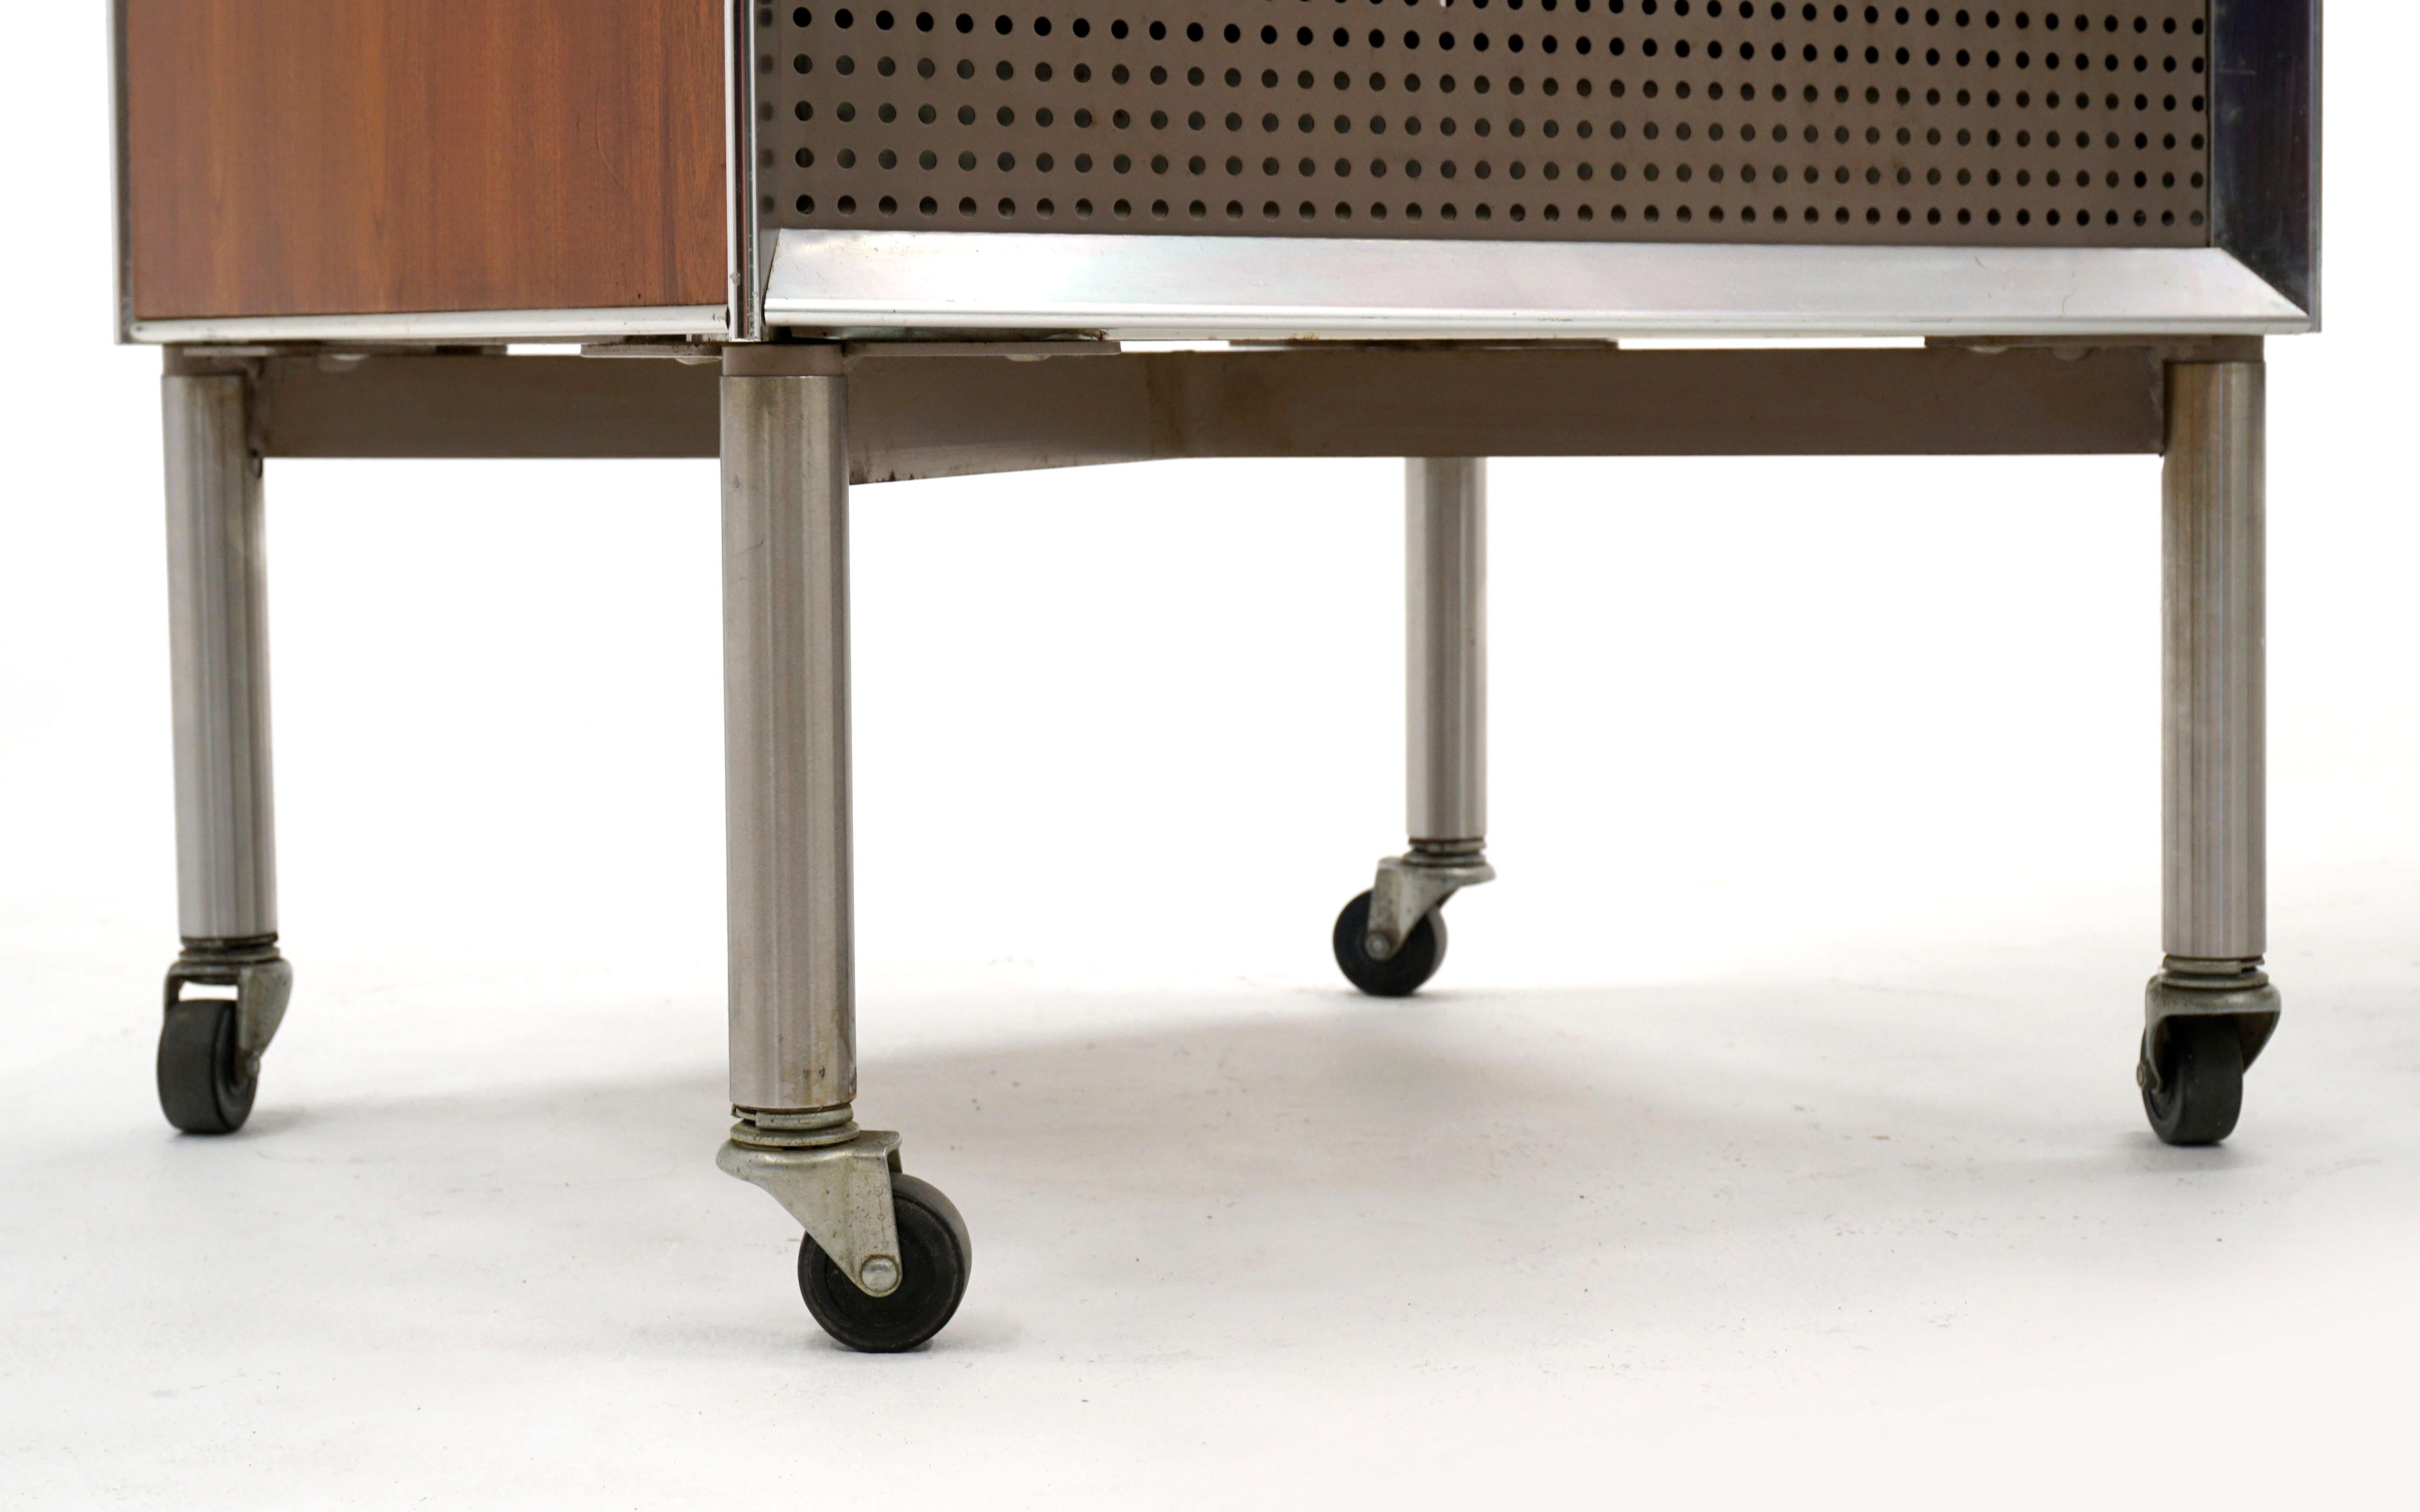 Aluminum Pair Nightstands by Raymond Loewy for Hill Rom, Walnut, off White Laminate Tops